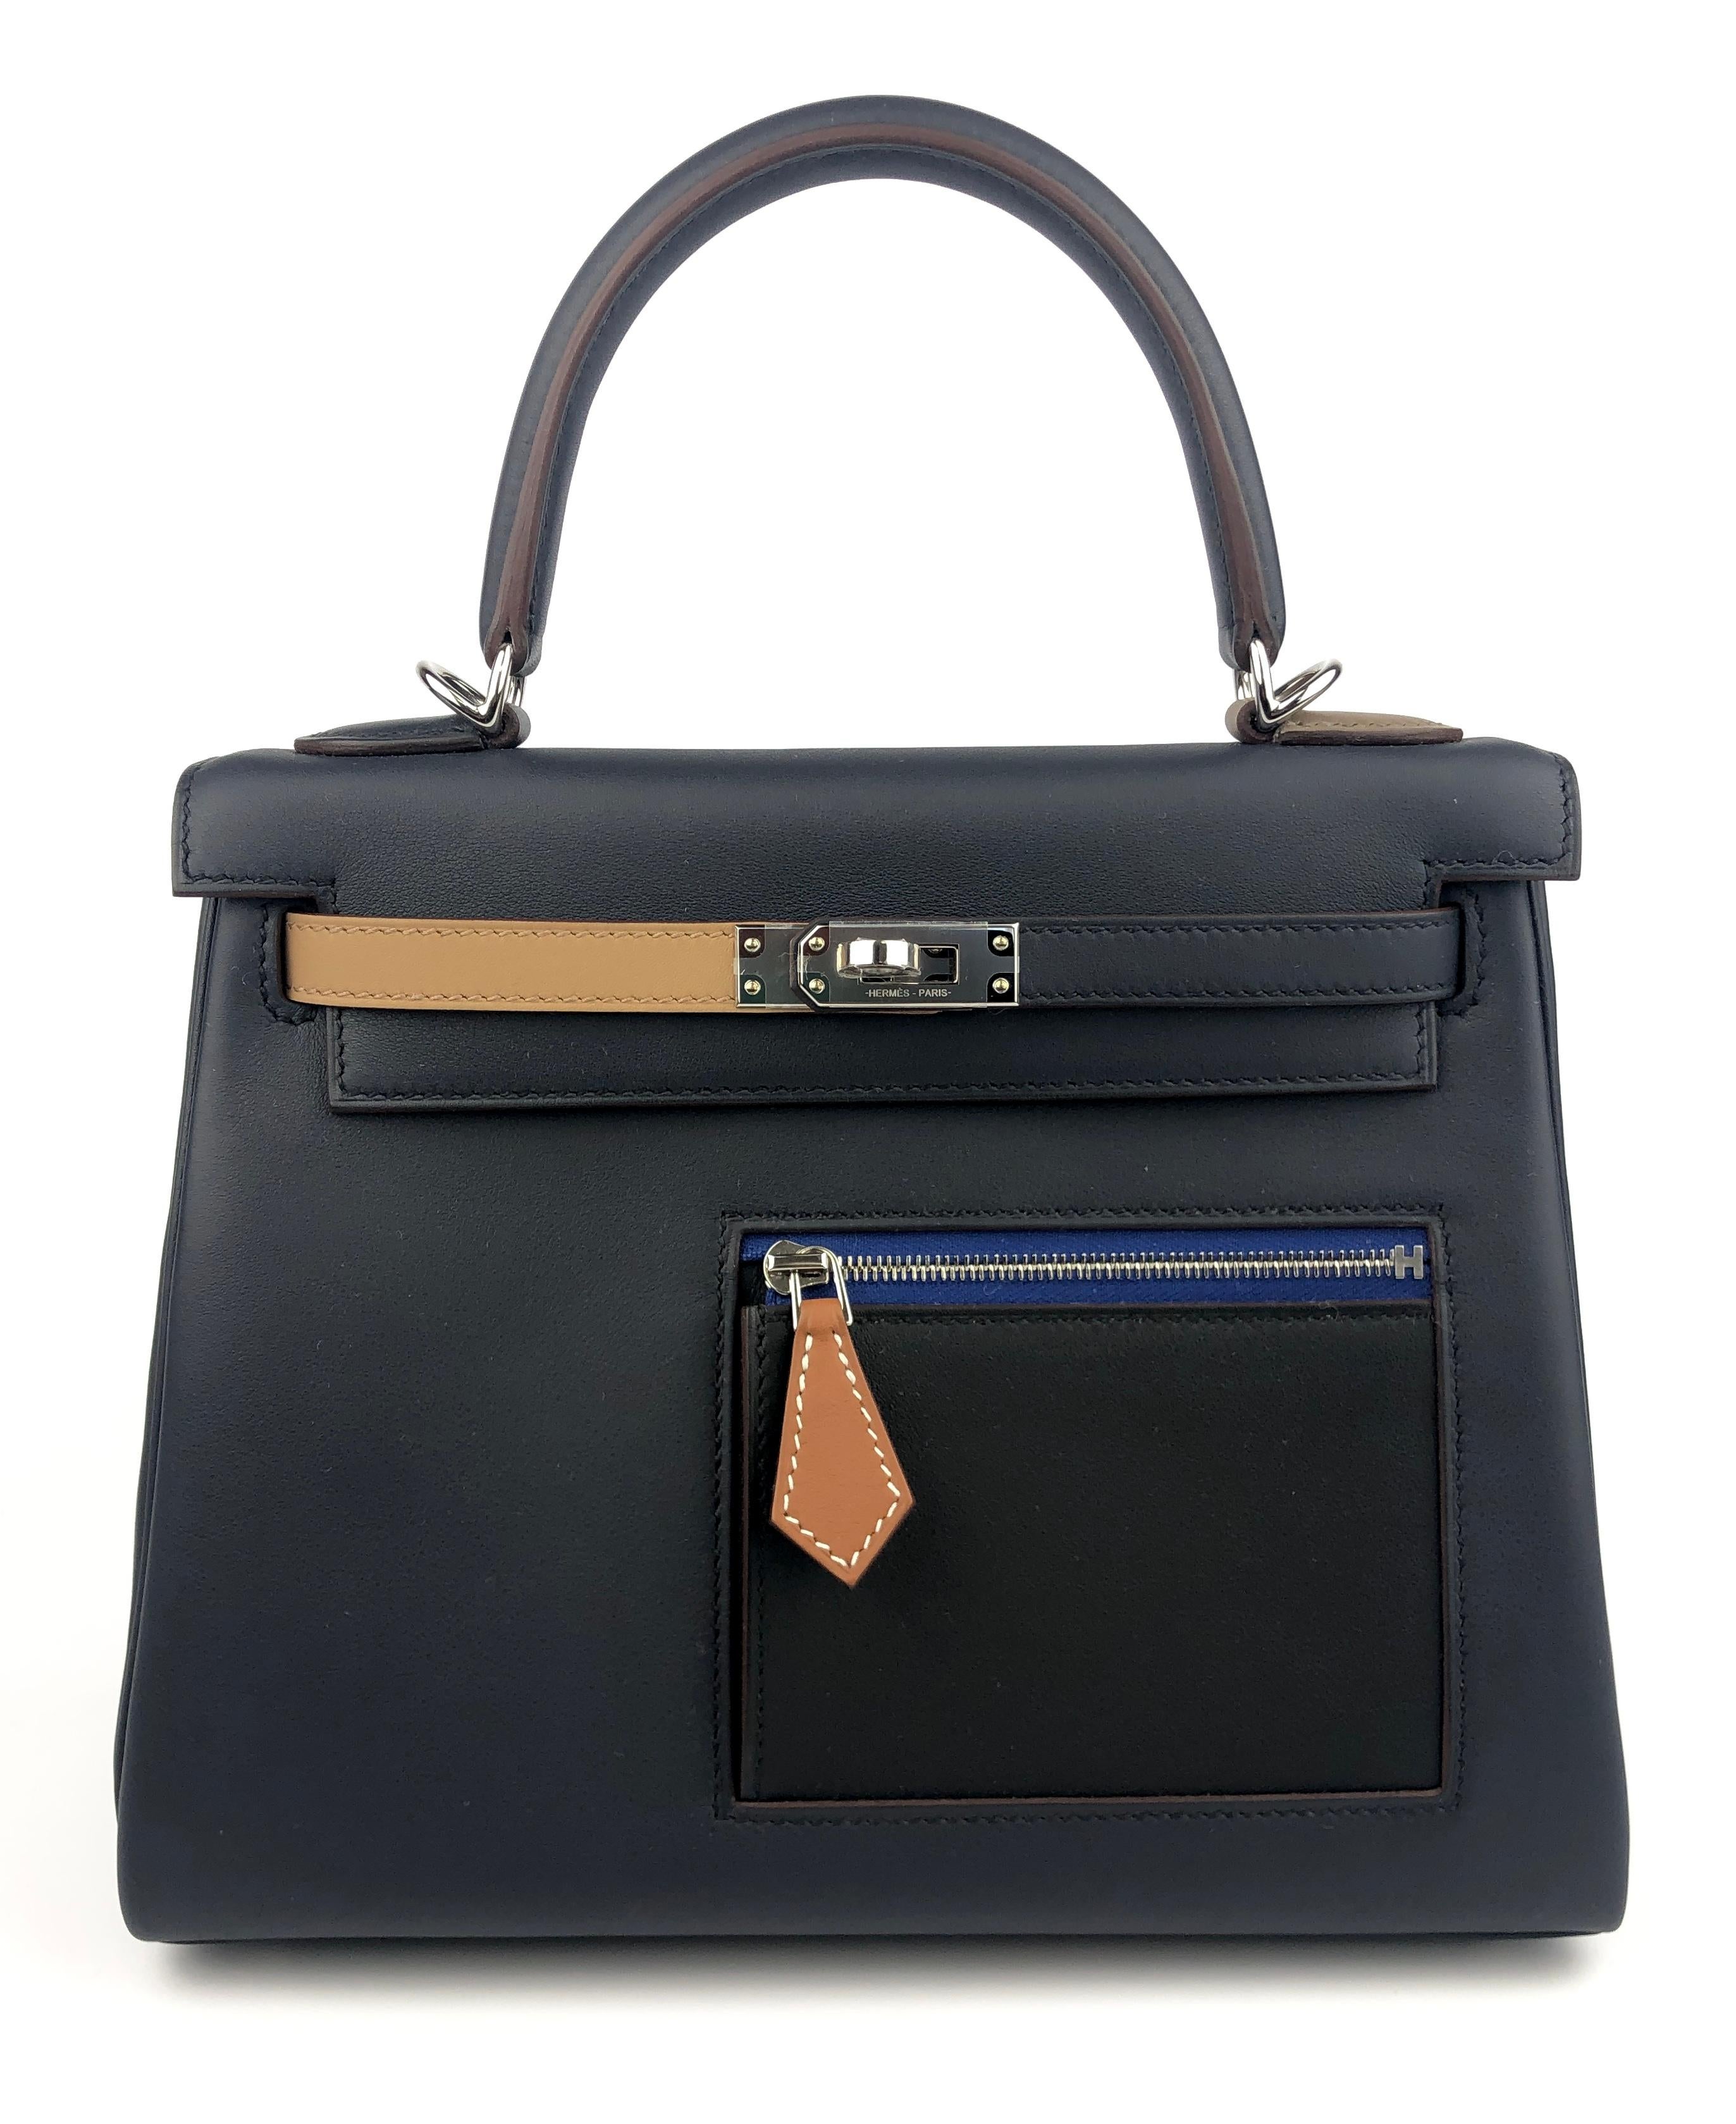 Brand New 2022 Purchase Ultra Rare and Hardest to get Hermes Kelly 25 Colormatic Blue ( Caban) Chai, Black, Gold and Etoupe Leather Complimented by Palladium Hardware. Includes all Accessories and Box.

Shop with Confidence from Lux Addicts.